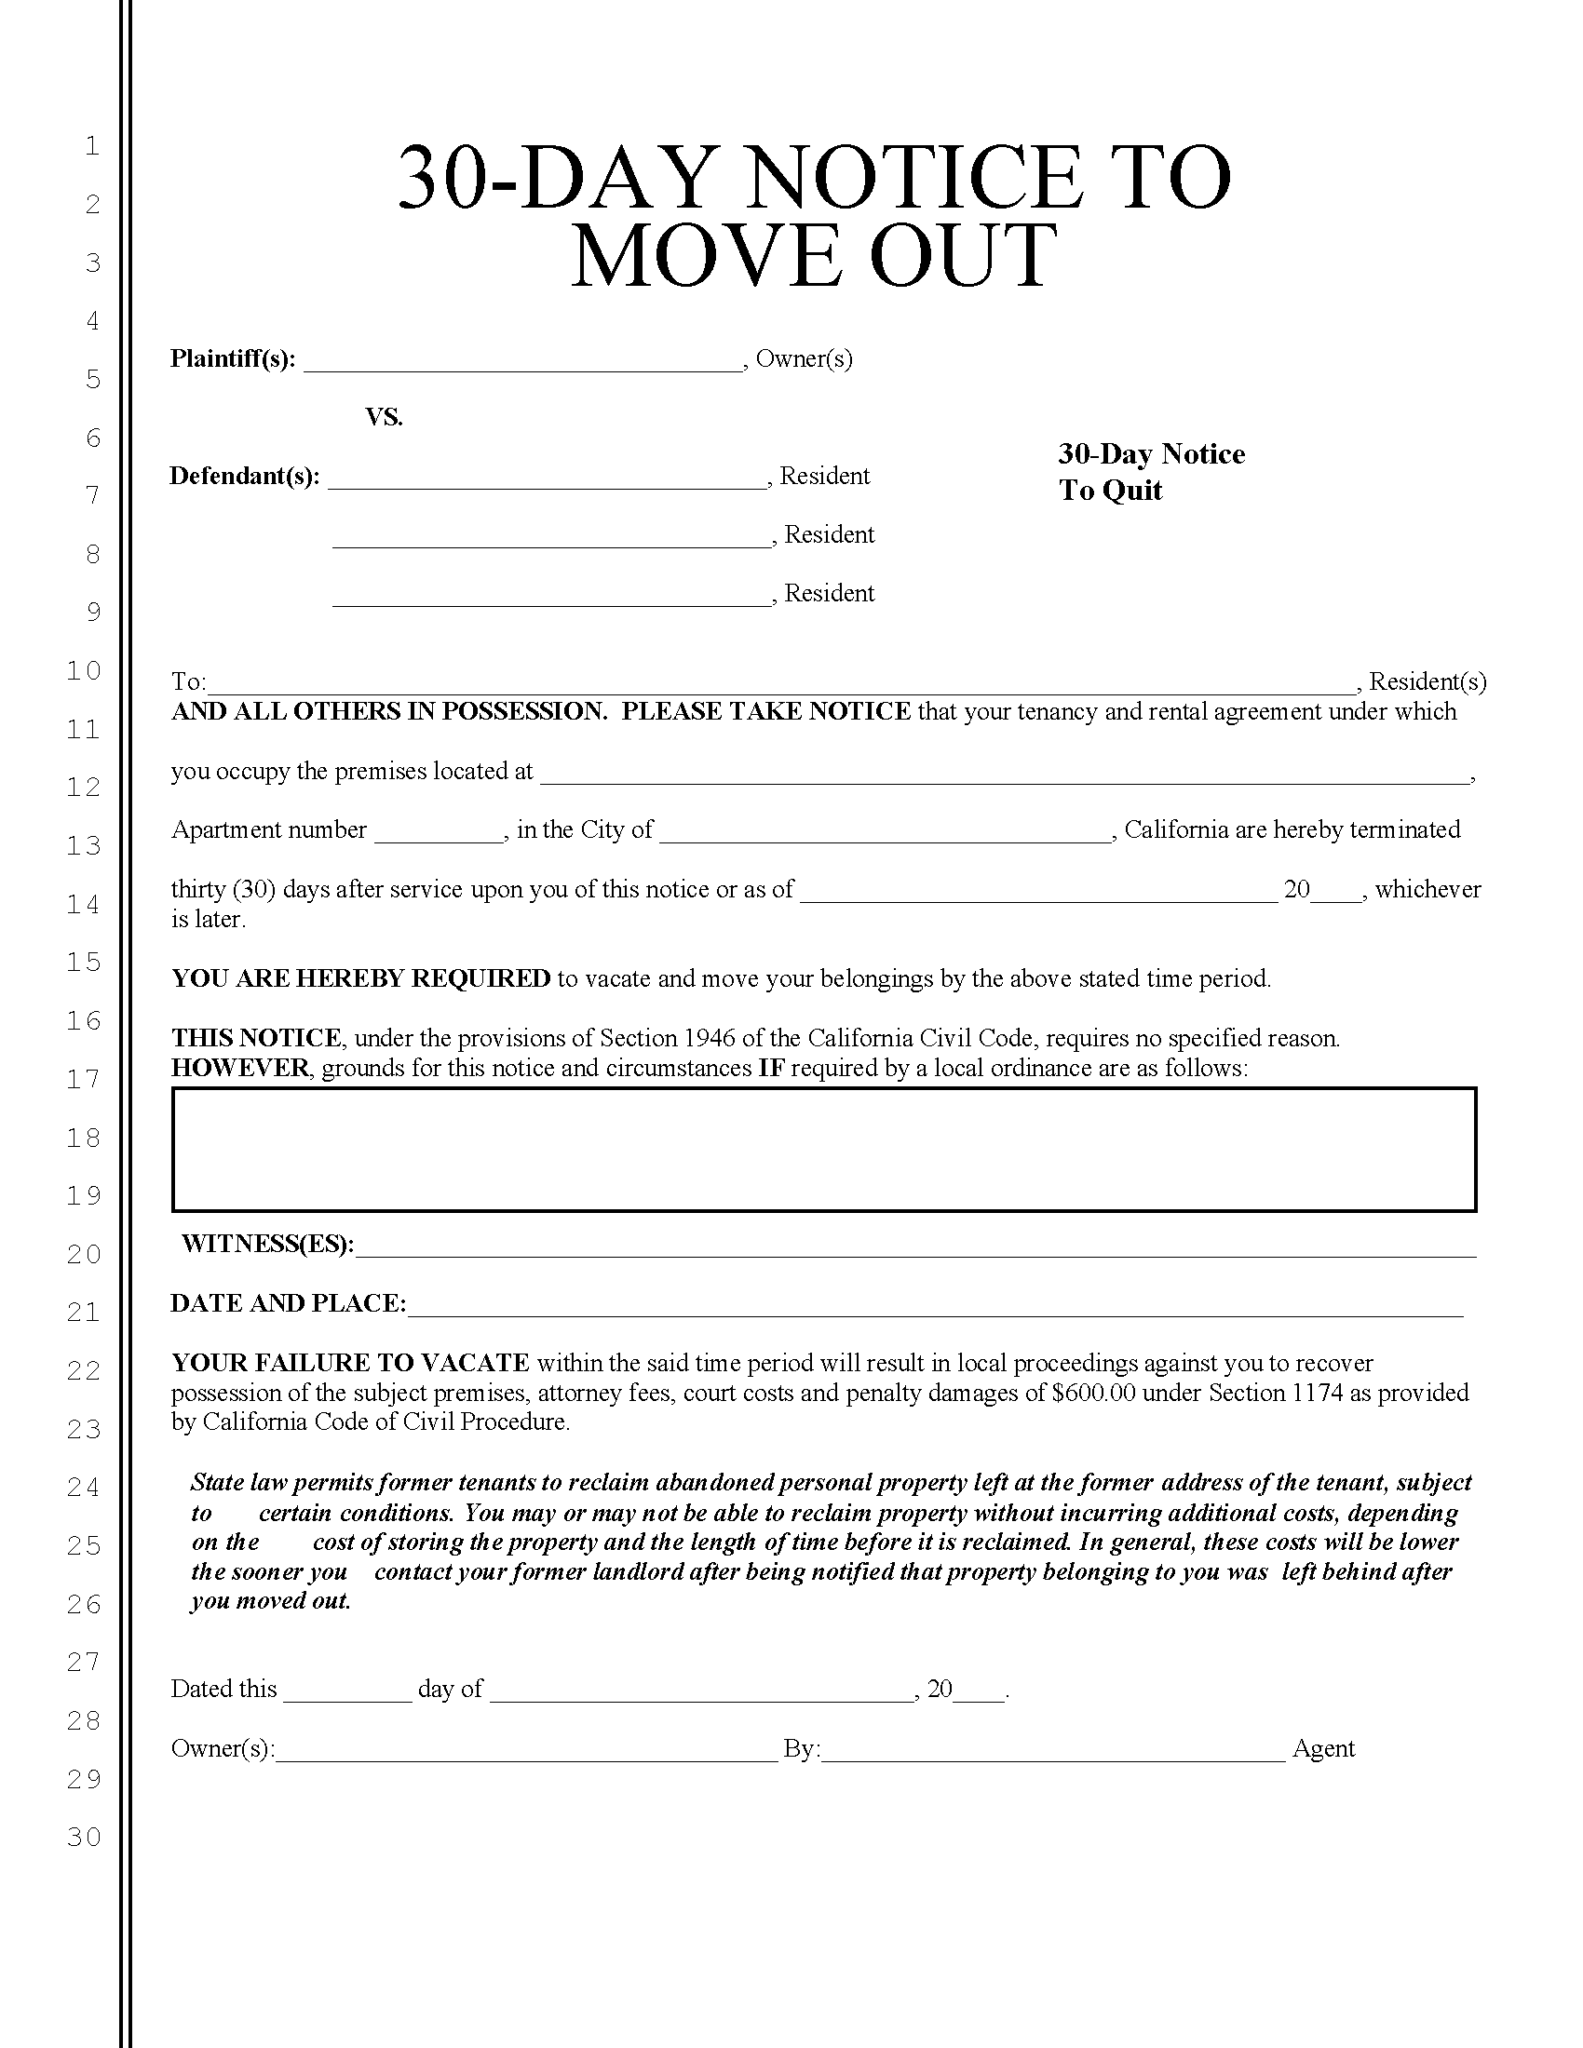 free-california-30-day-notice-to-quit-lease-termination-under-1-year